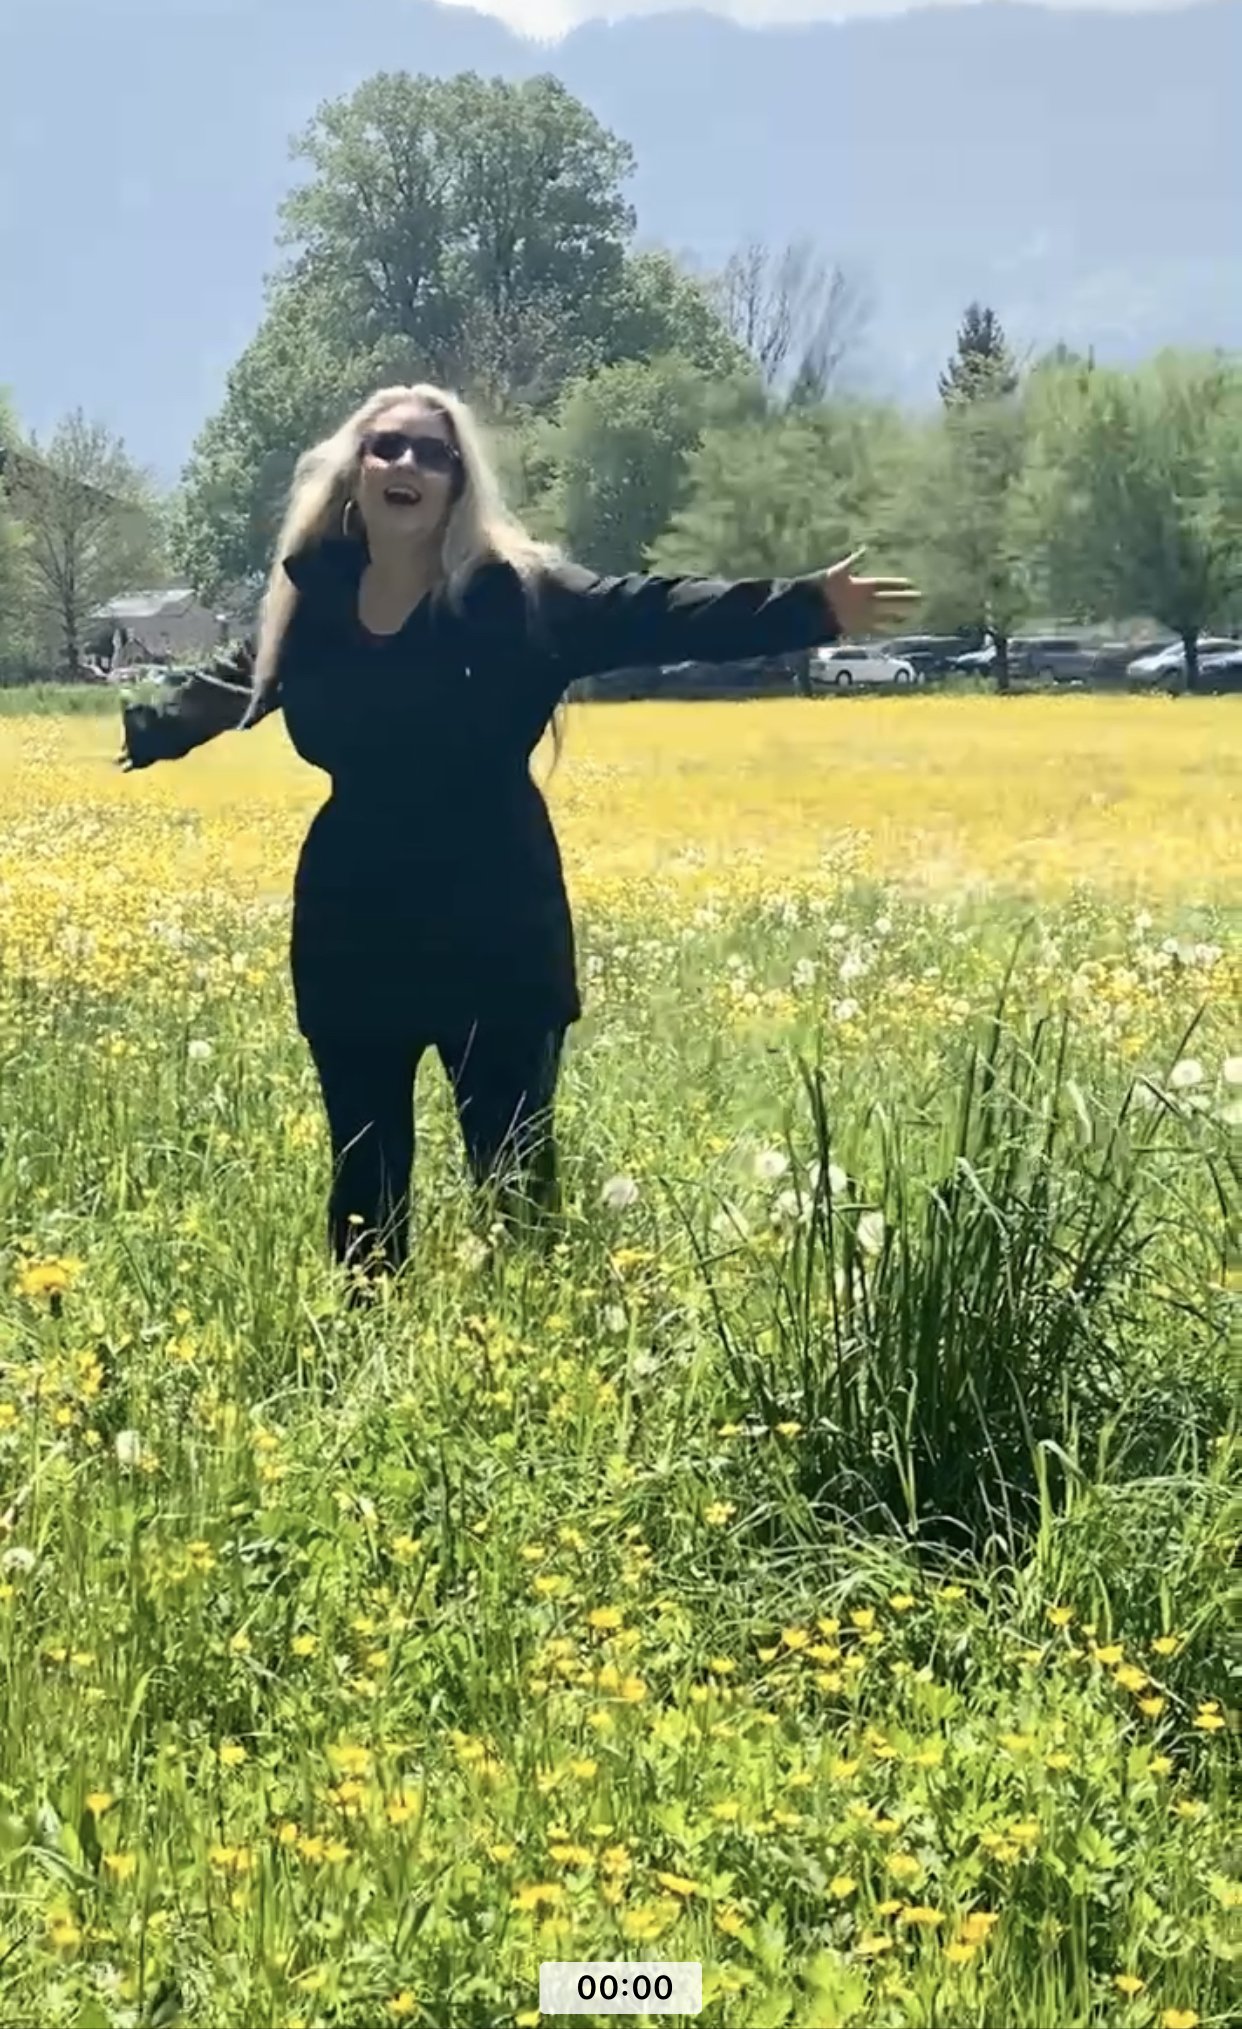 Me twirling in a field of flowers just like Fraulein Maria